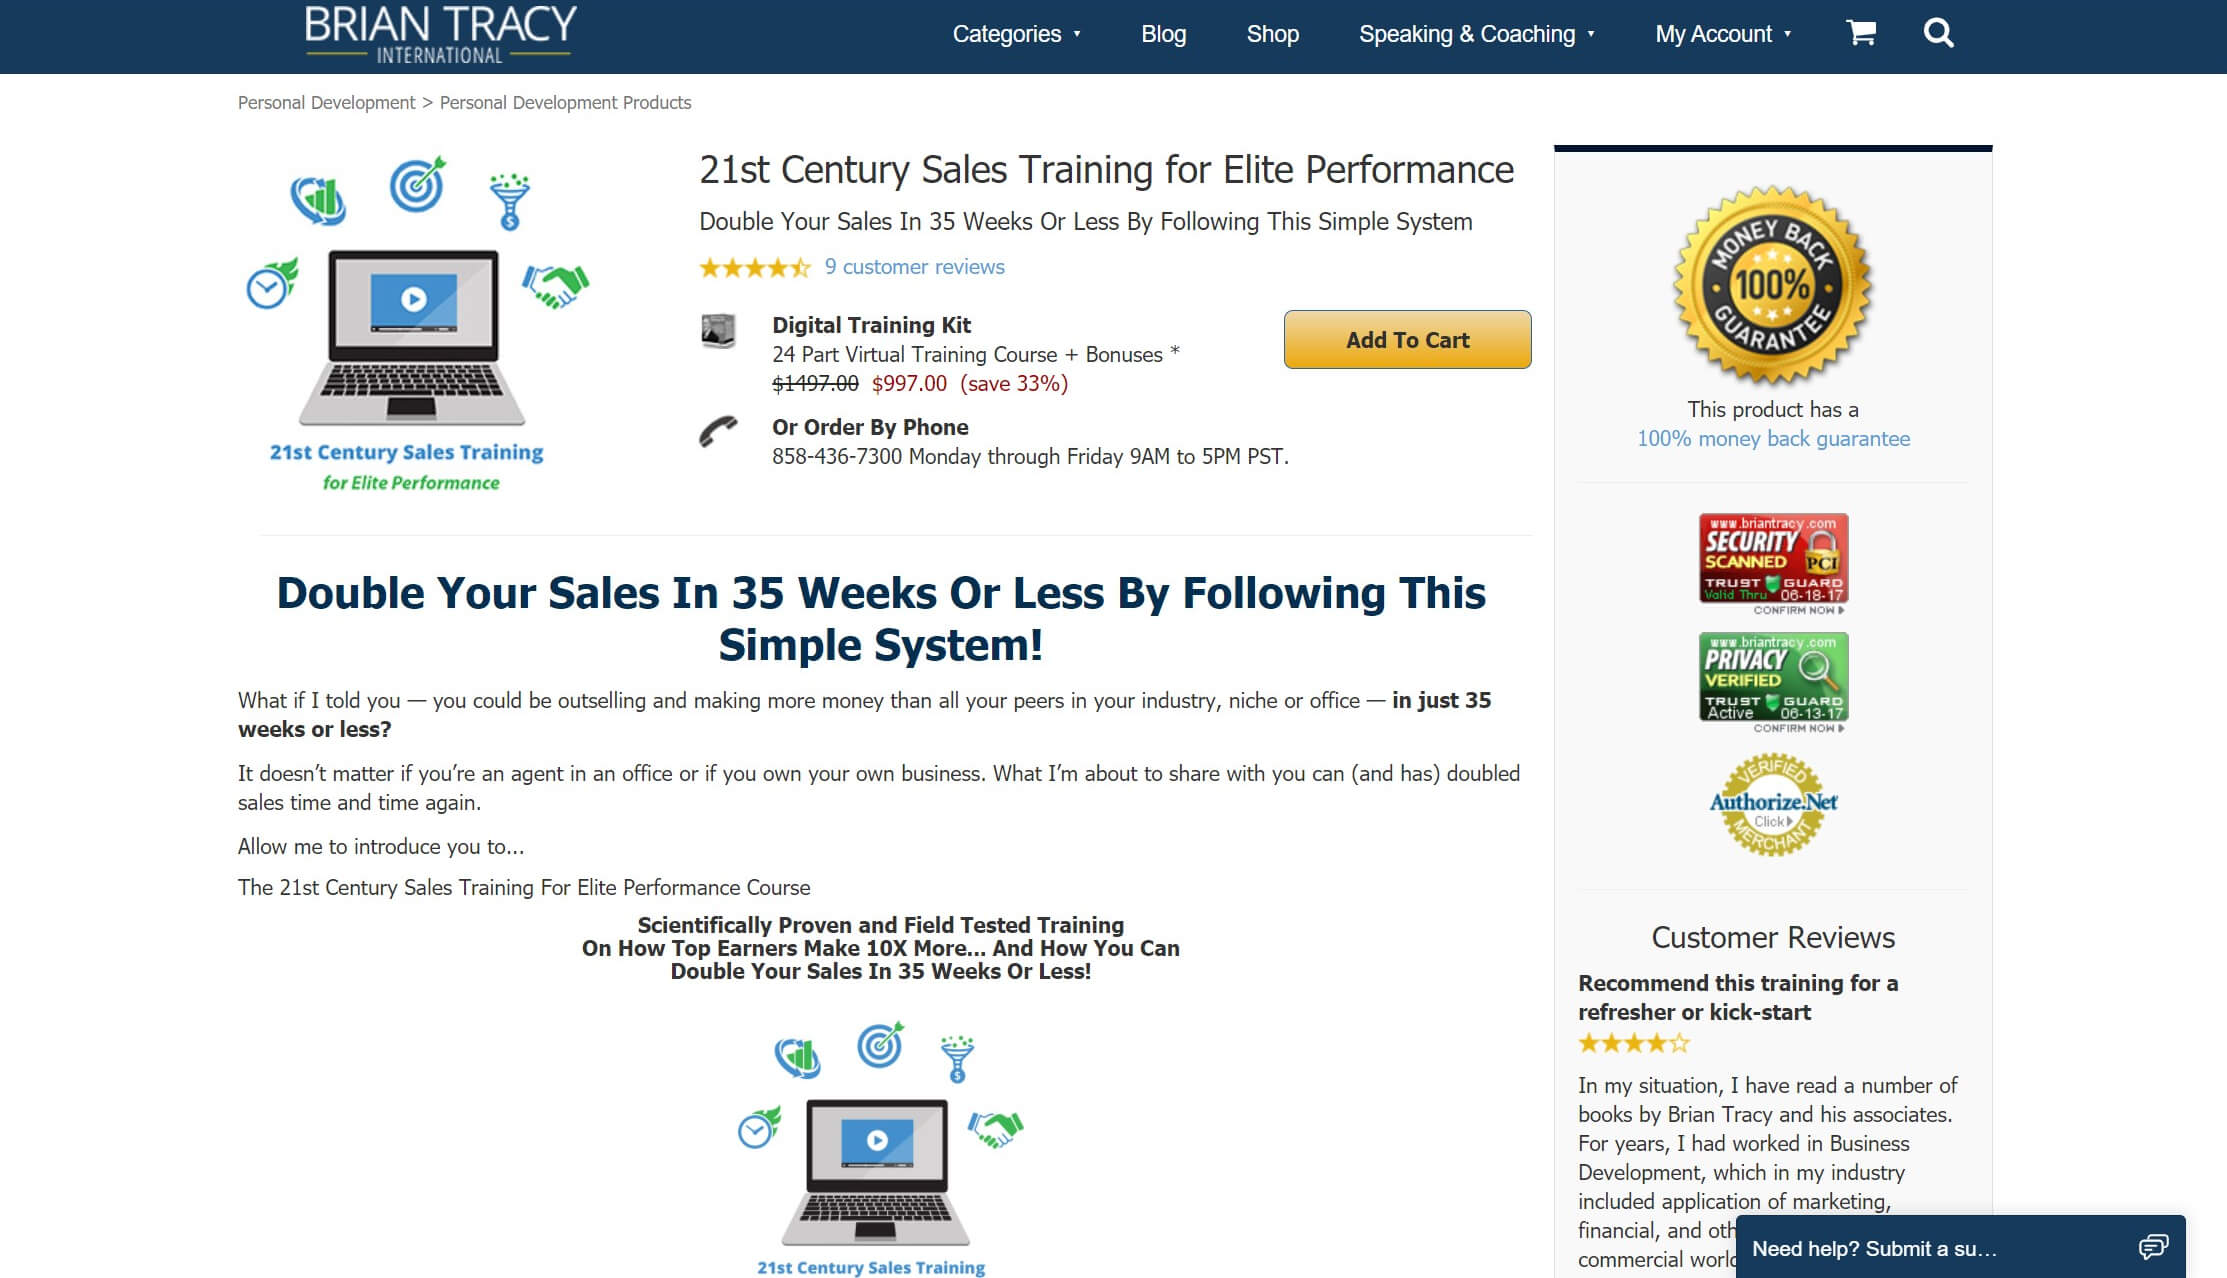 The 21st Century Sales online training course.